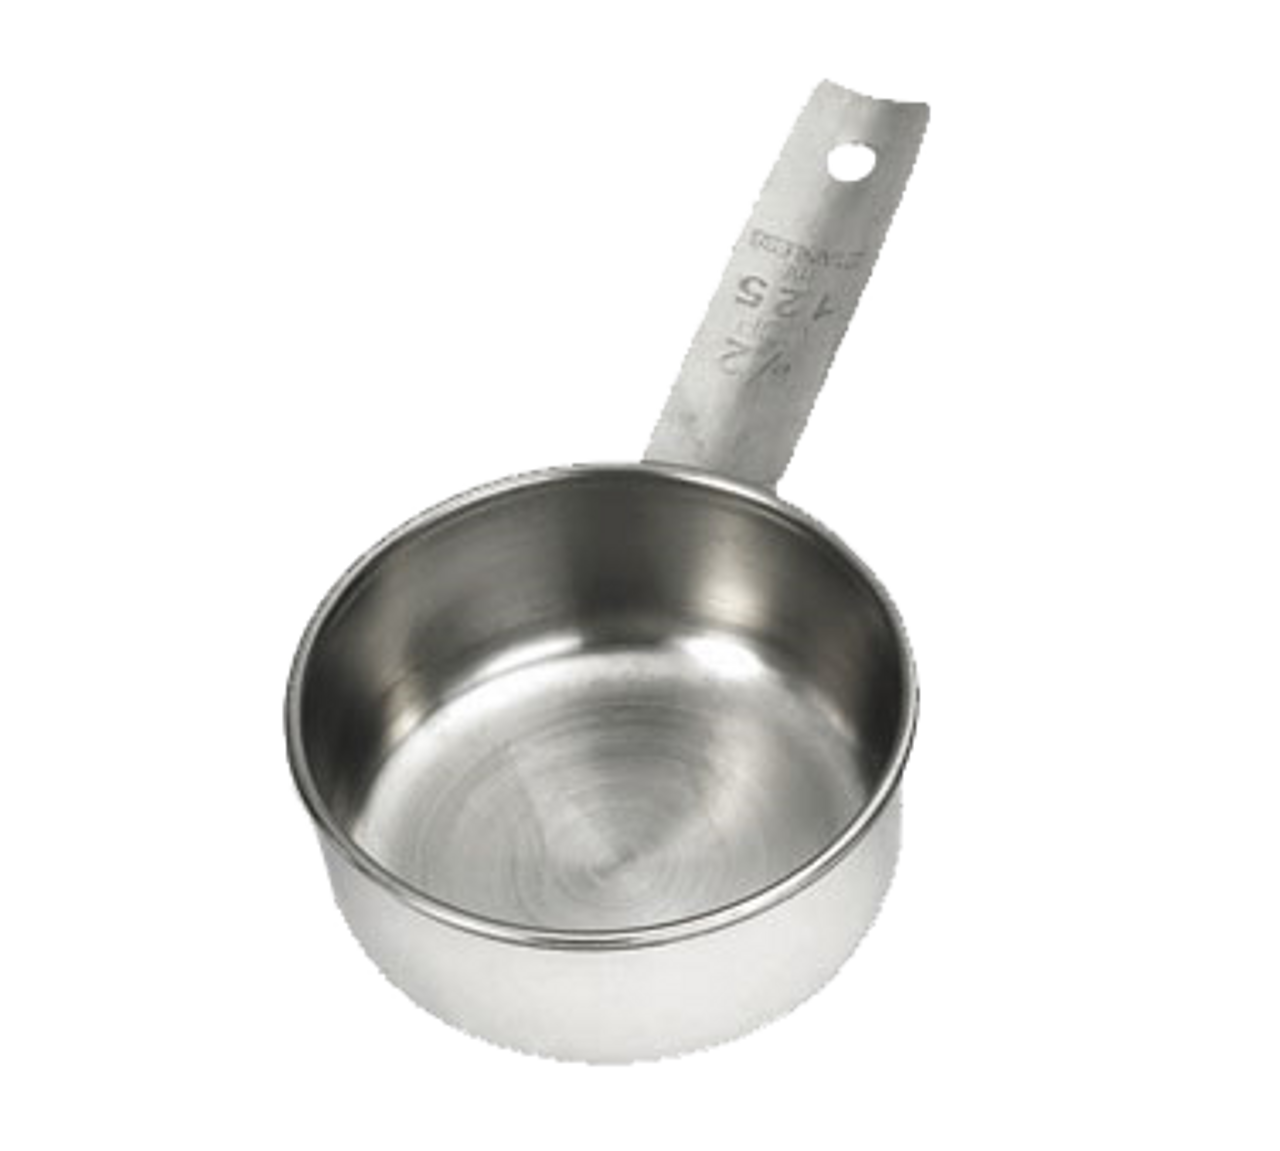 Tablecraft (724C) 1/2 Cup Stainless Steel Measuring Cup